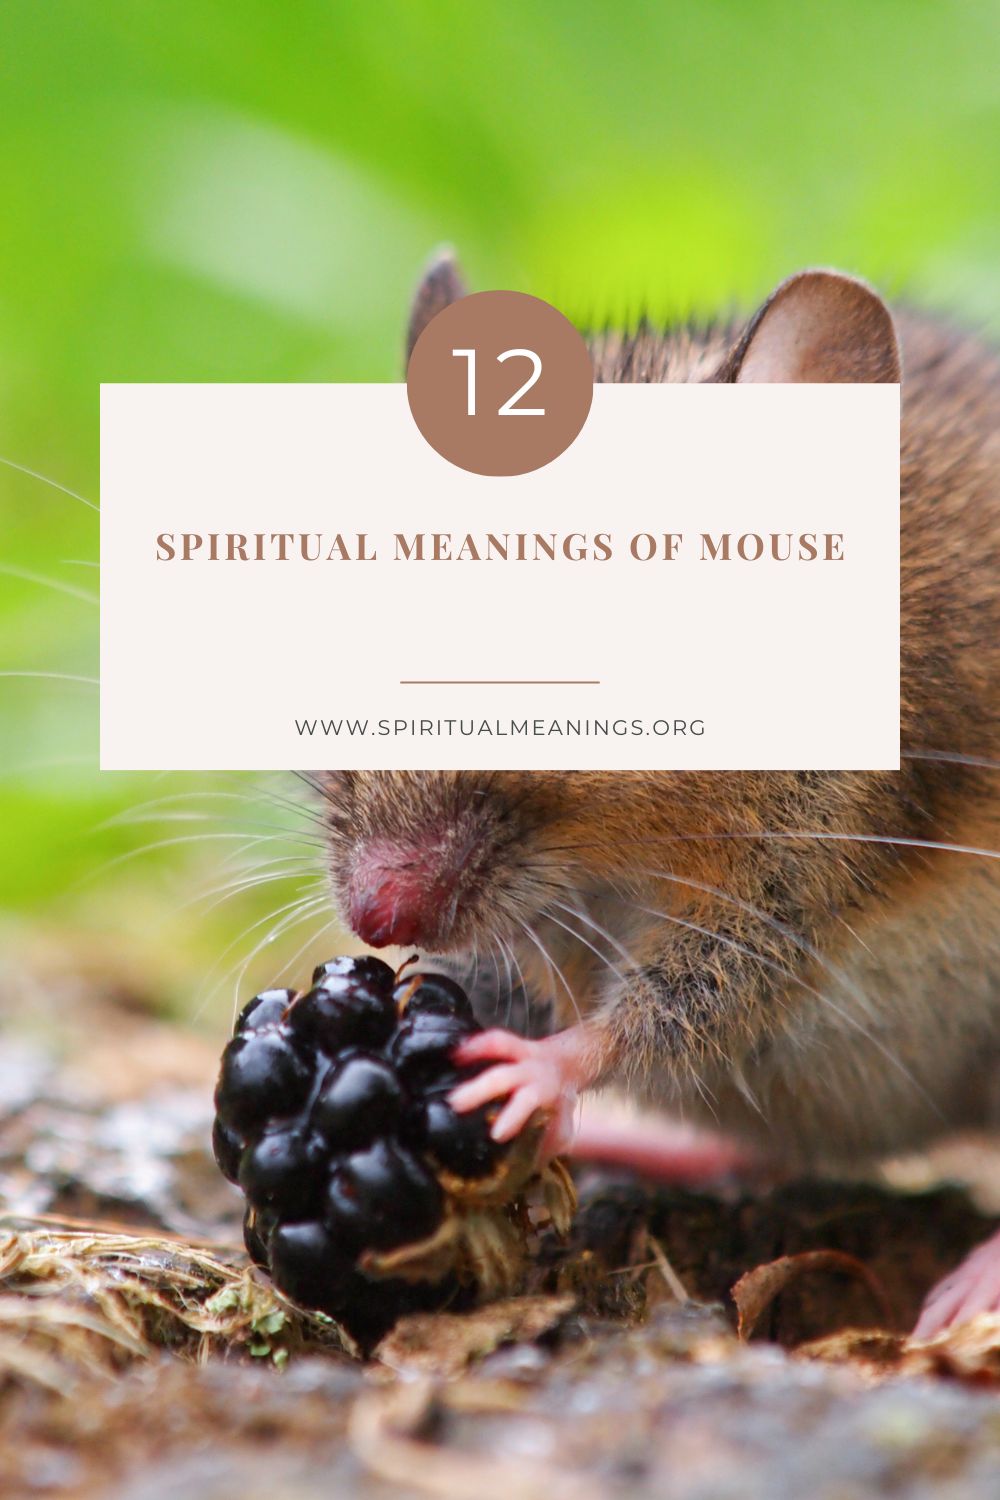 Summary: Mouse Symbolism and Spiritual Meaning